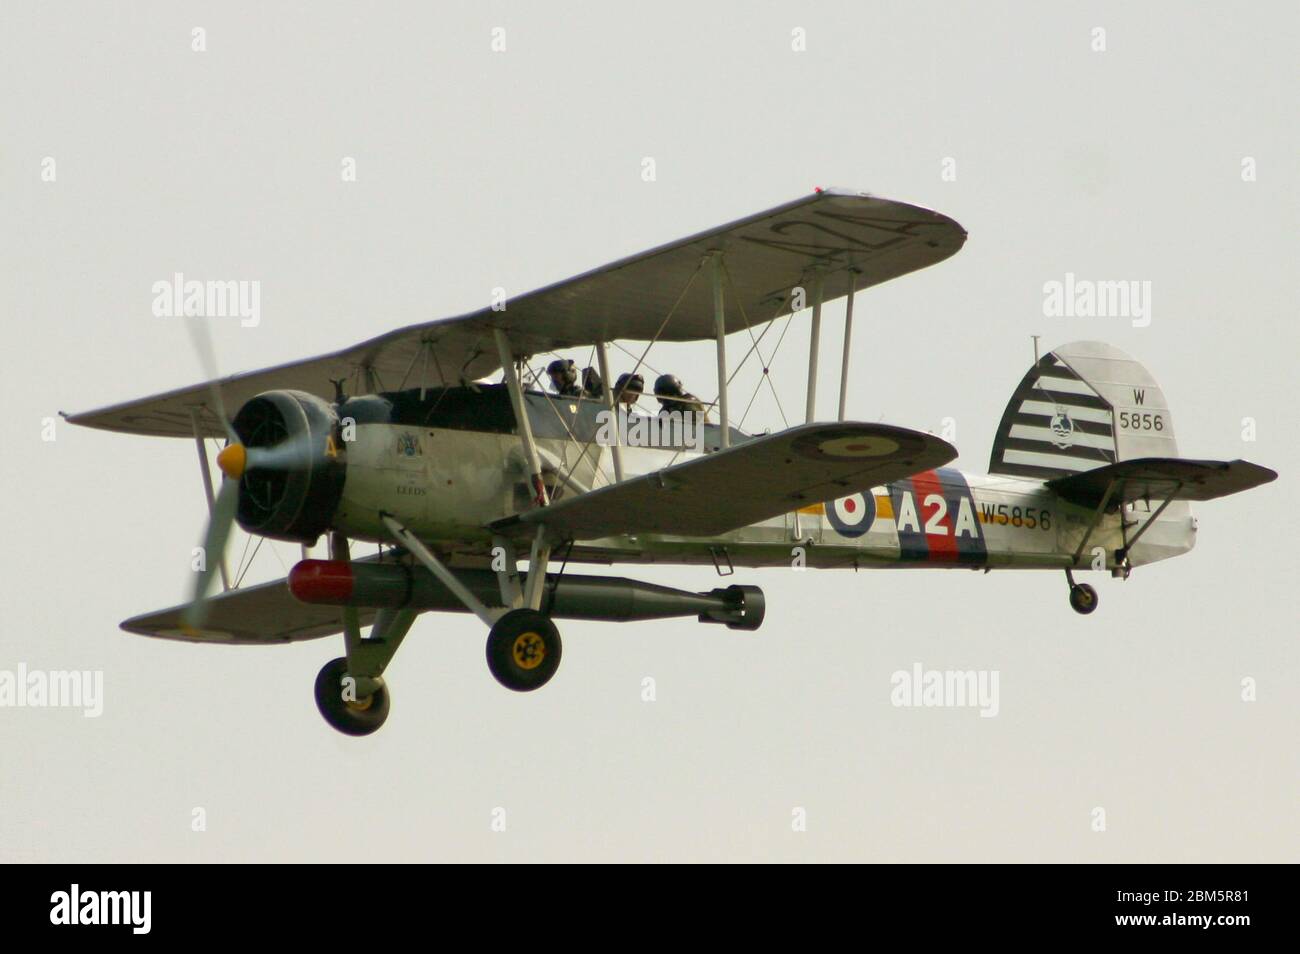 W5856 arrives over Speke airport during 2003, where she conducted a go round to enable the photographs to be taken rather then catching her taxying in to the Buisiness Avaition Centre Credit: Photographing North/Alamy Live News Stock Photo